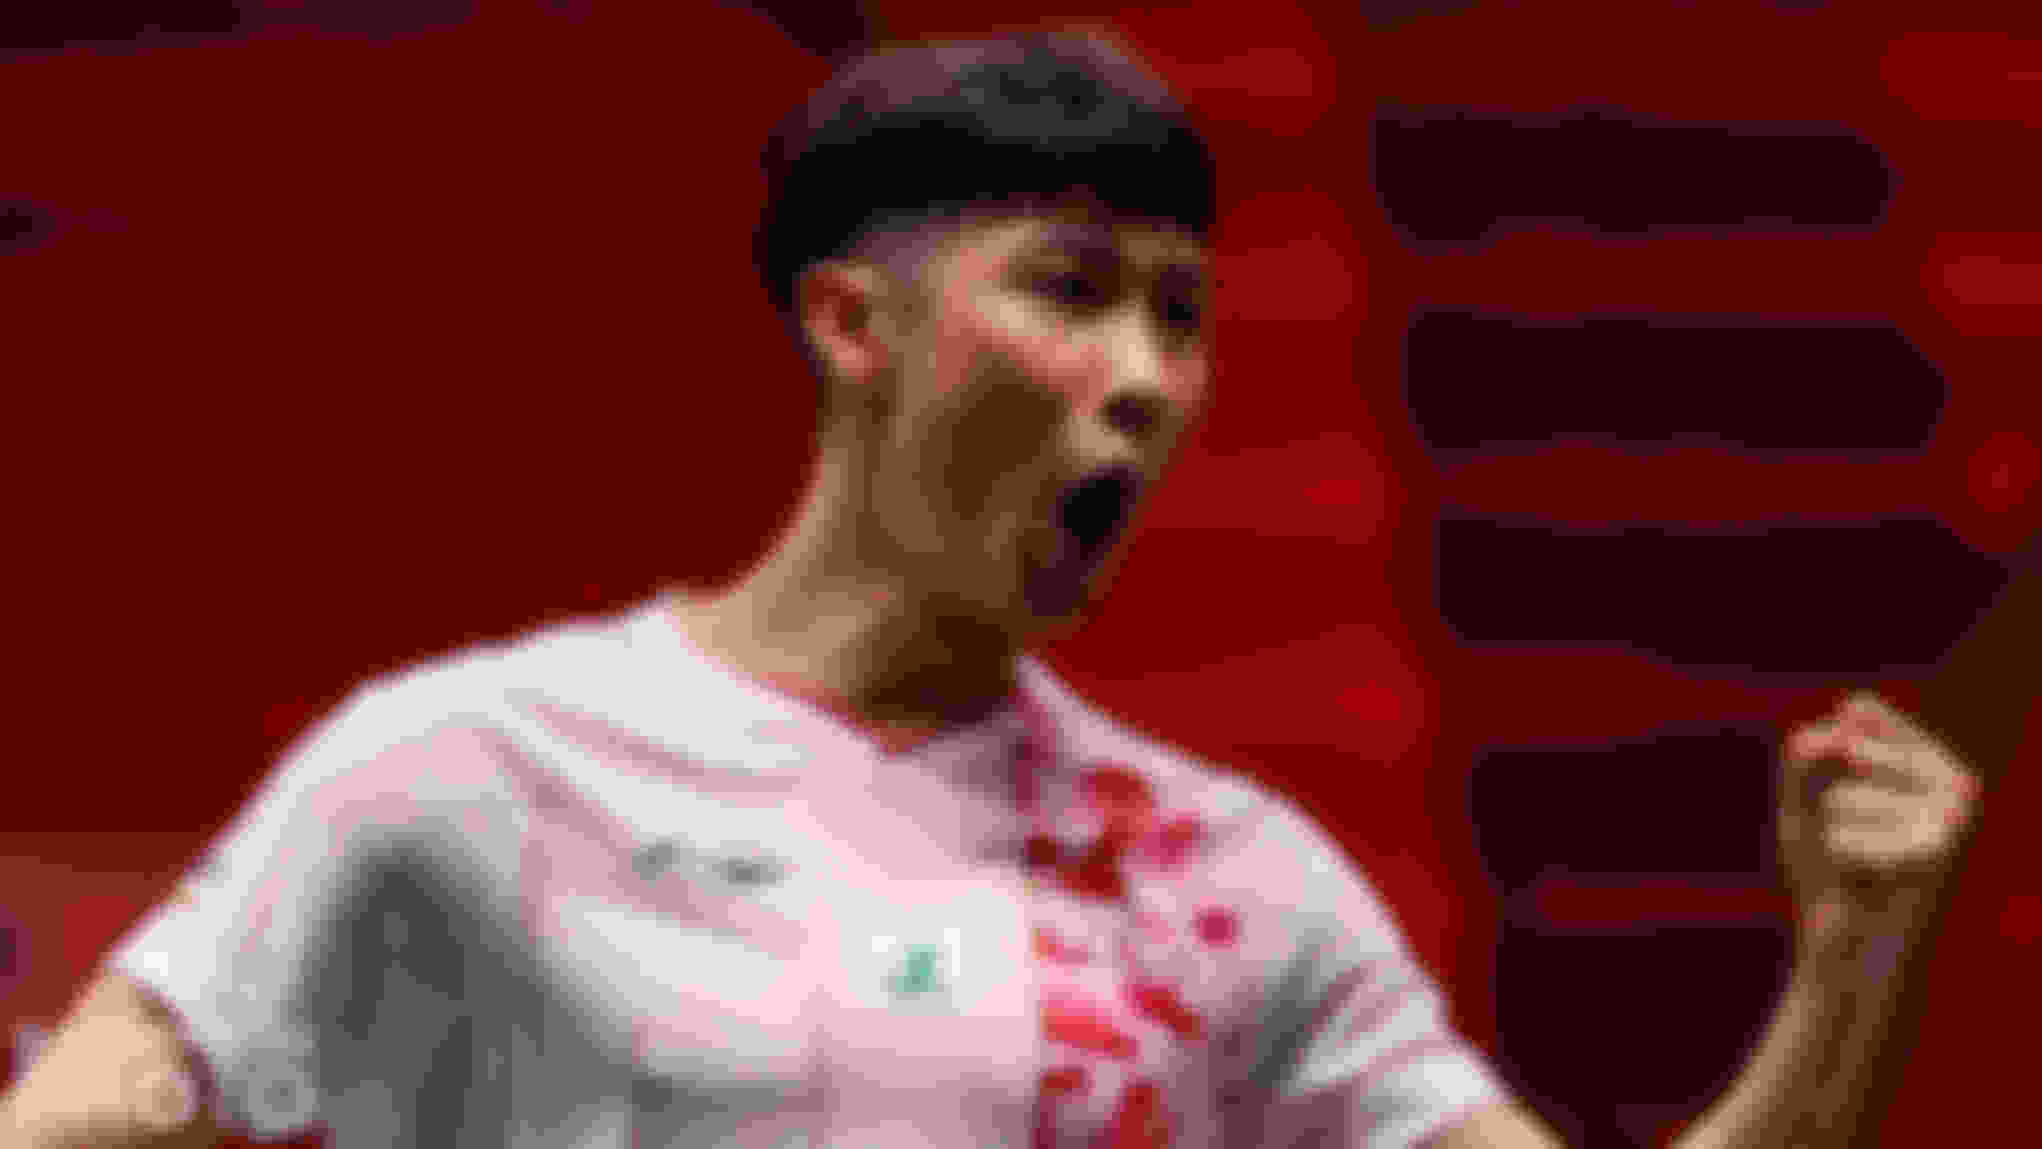 Loving it: Loh Kean Yew scored a strong win over tenacious Chu Tin Chen to kick off his Tour Finals campaign.